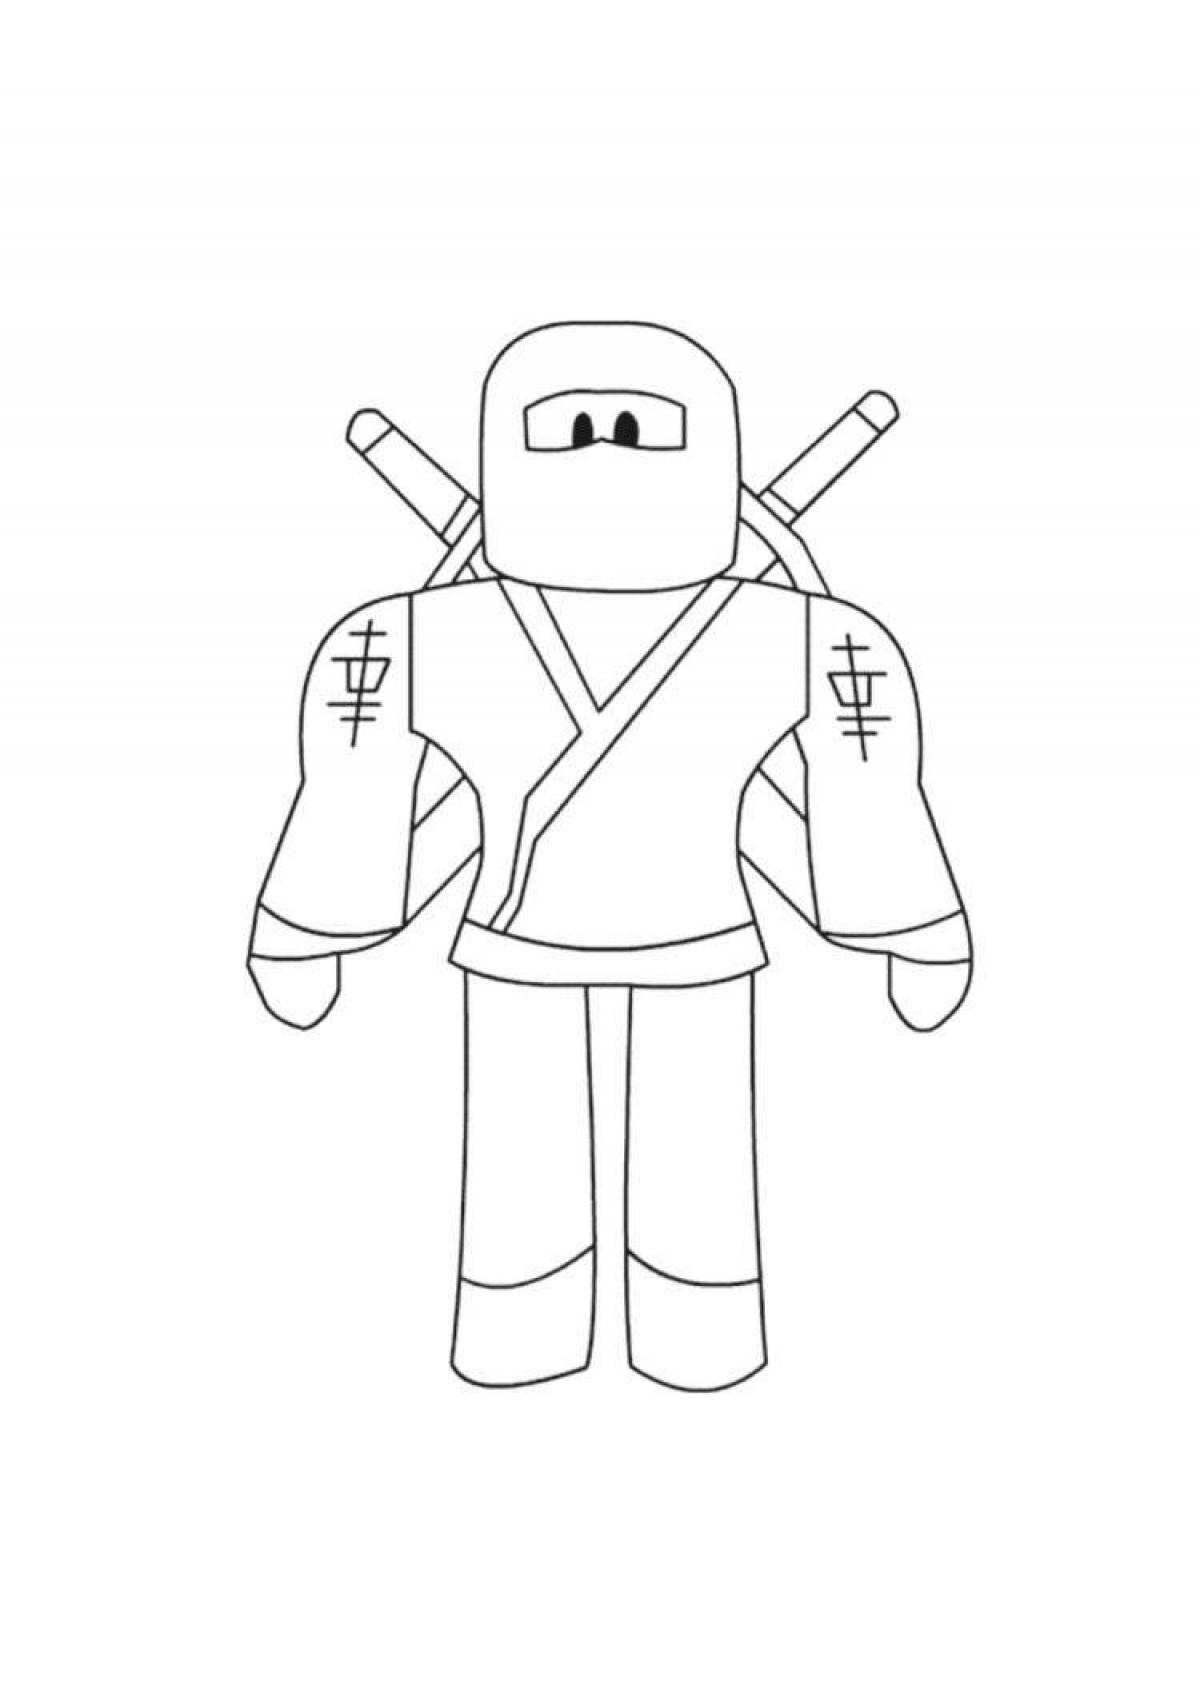 Roblox girls incredible skins coloring page